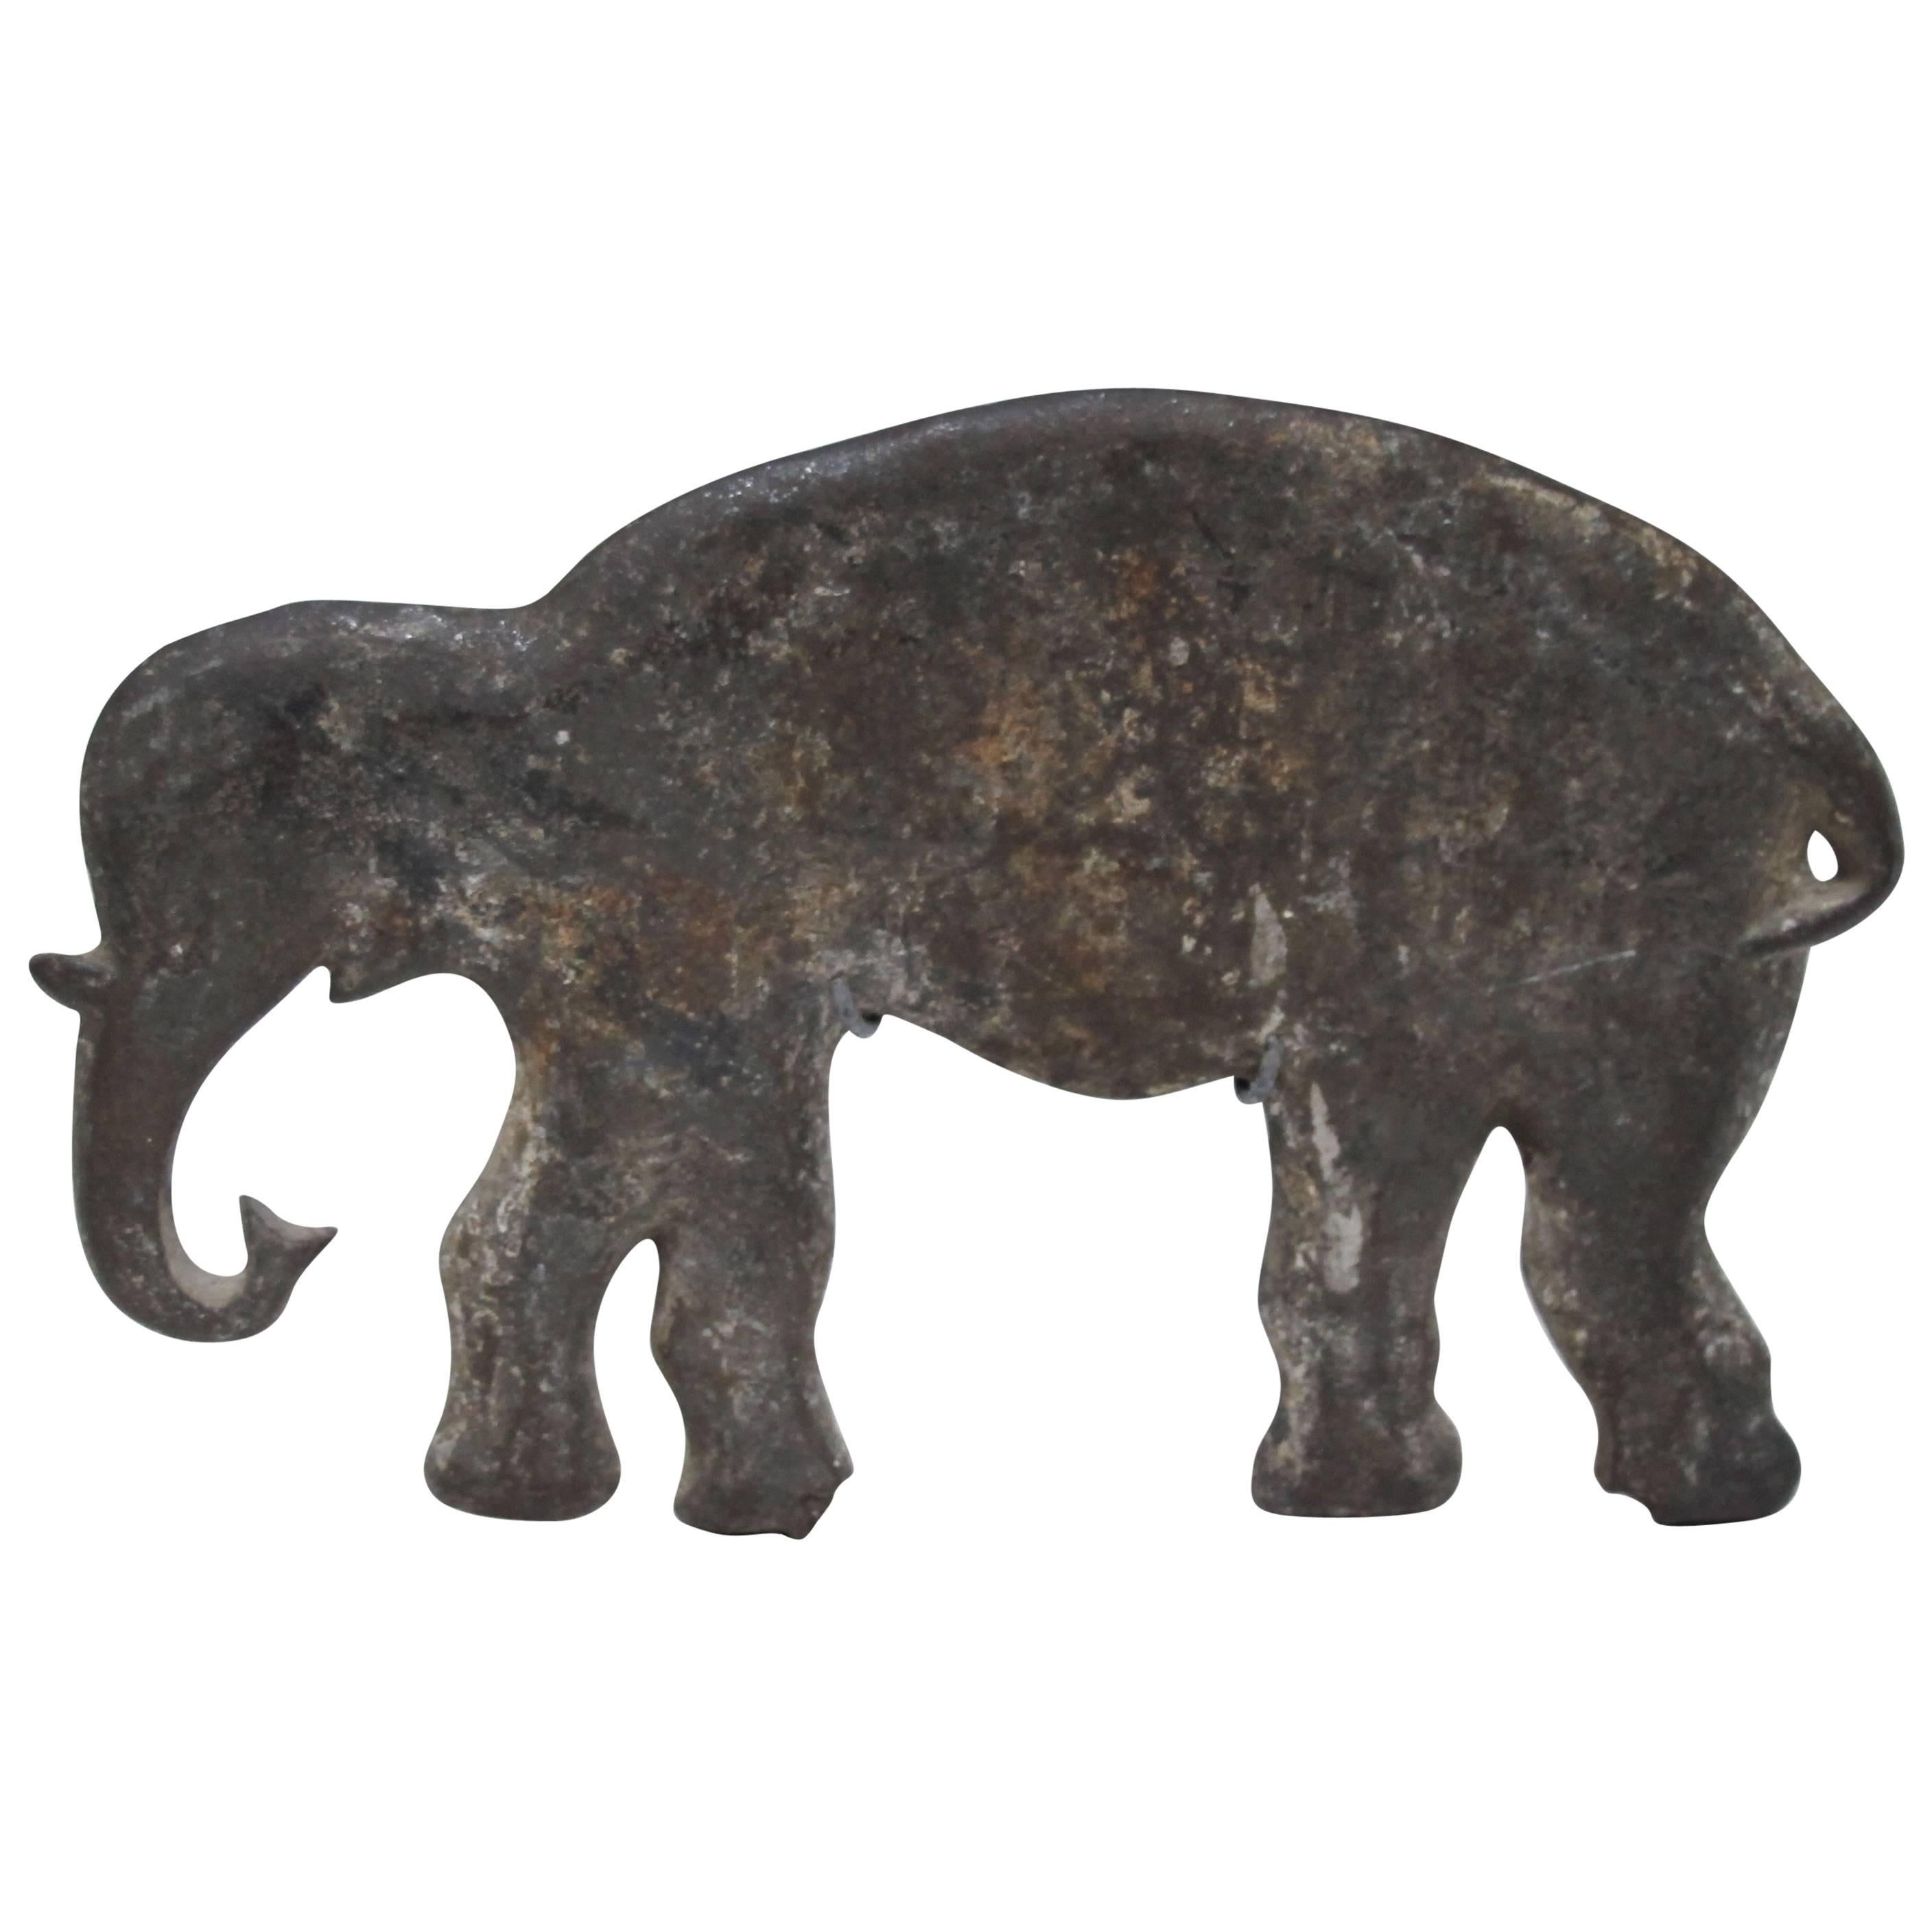 Cast Iron Elephant Carnival Arcade Shooting Gallery Target